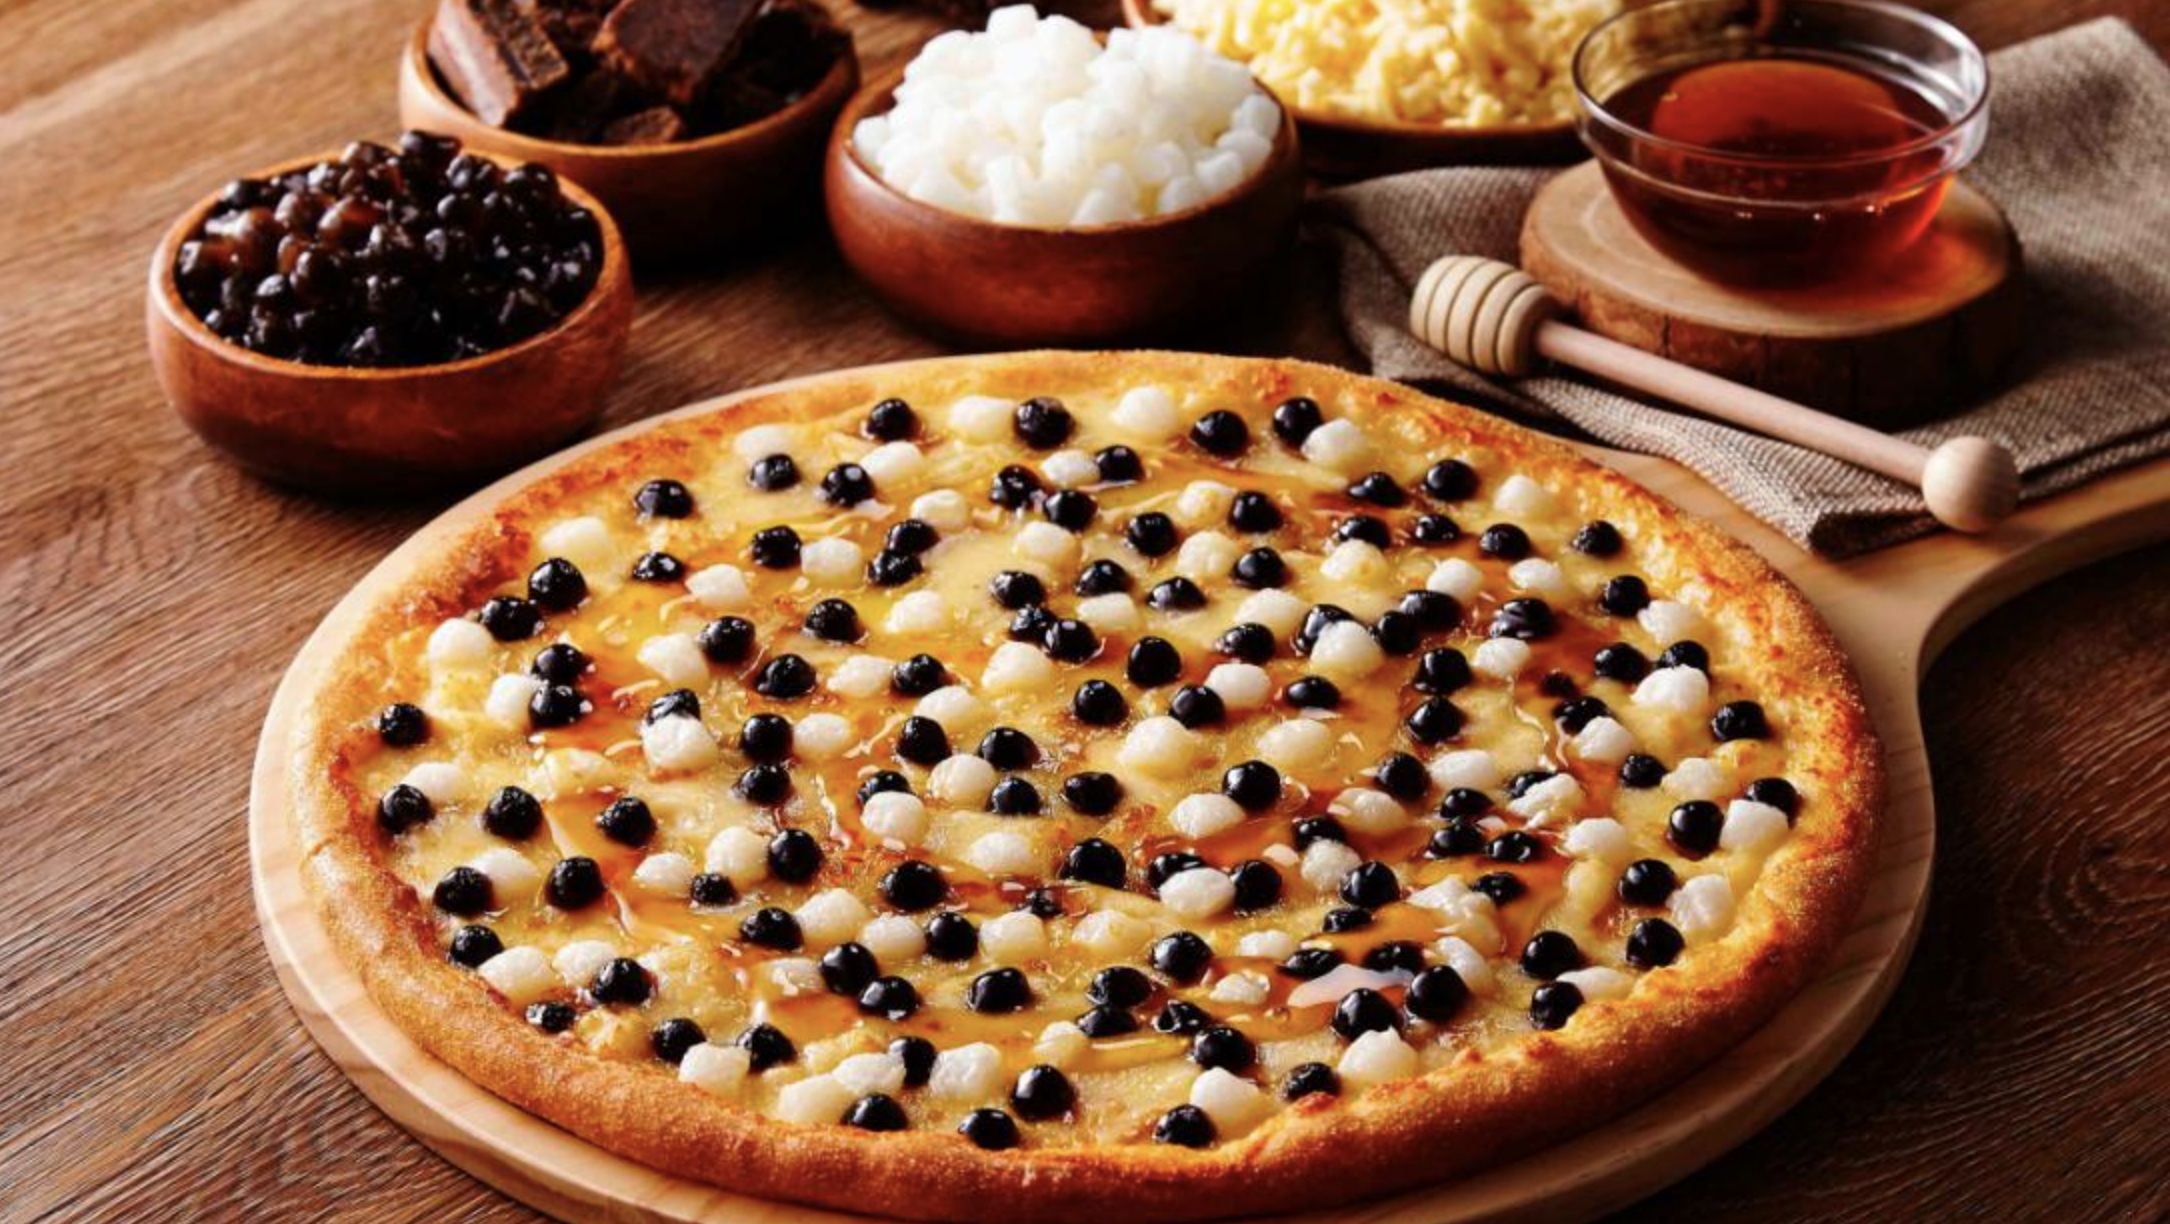 A pizza topped with tapioca balls and cheese